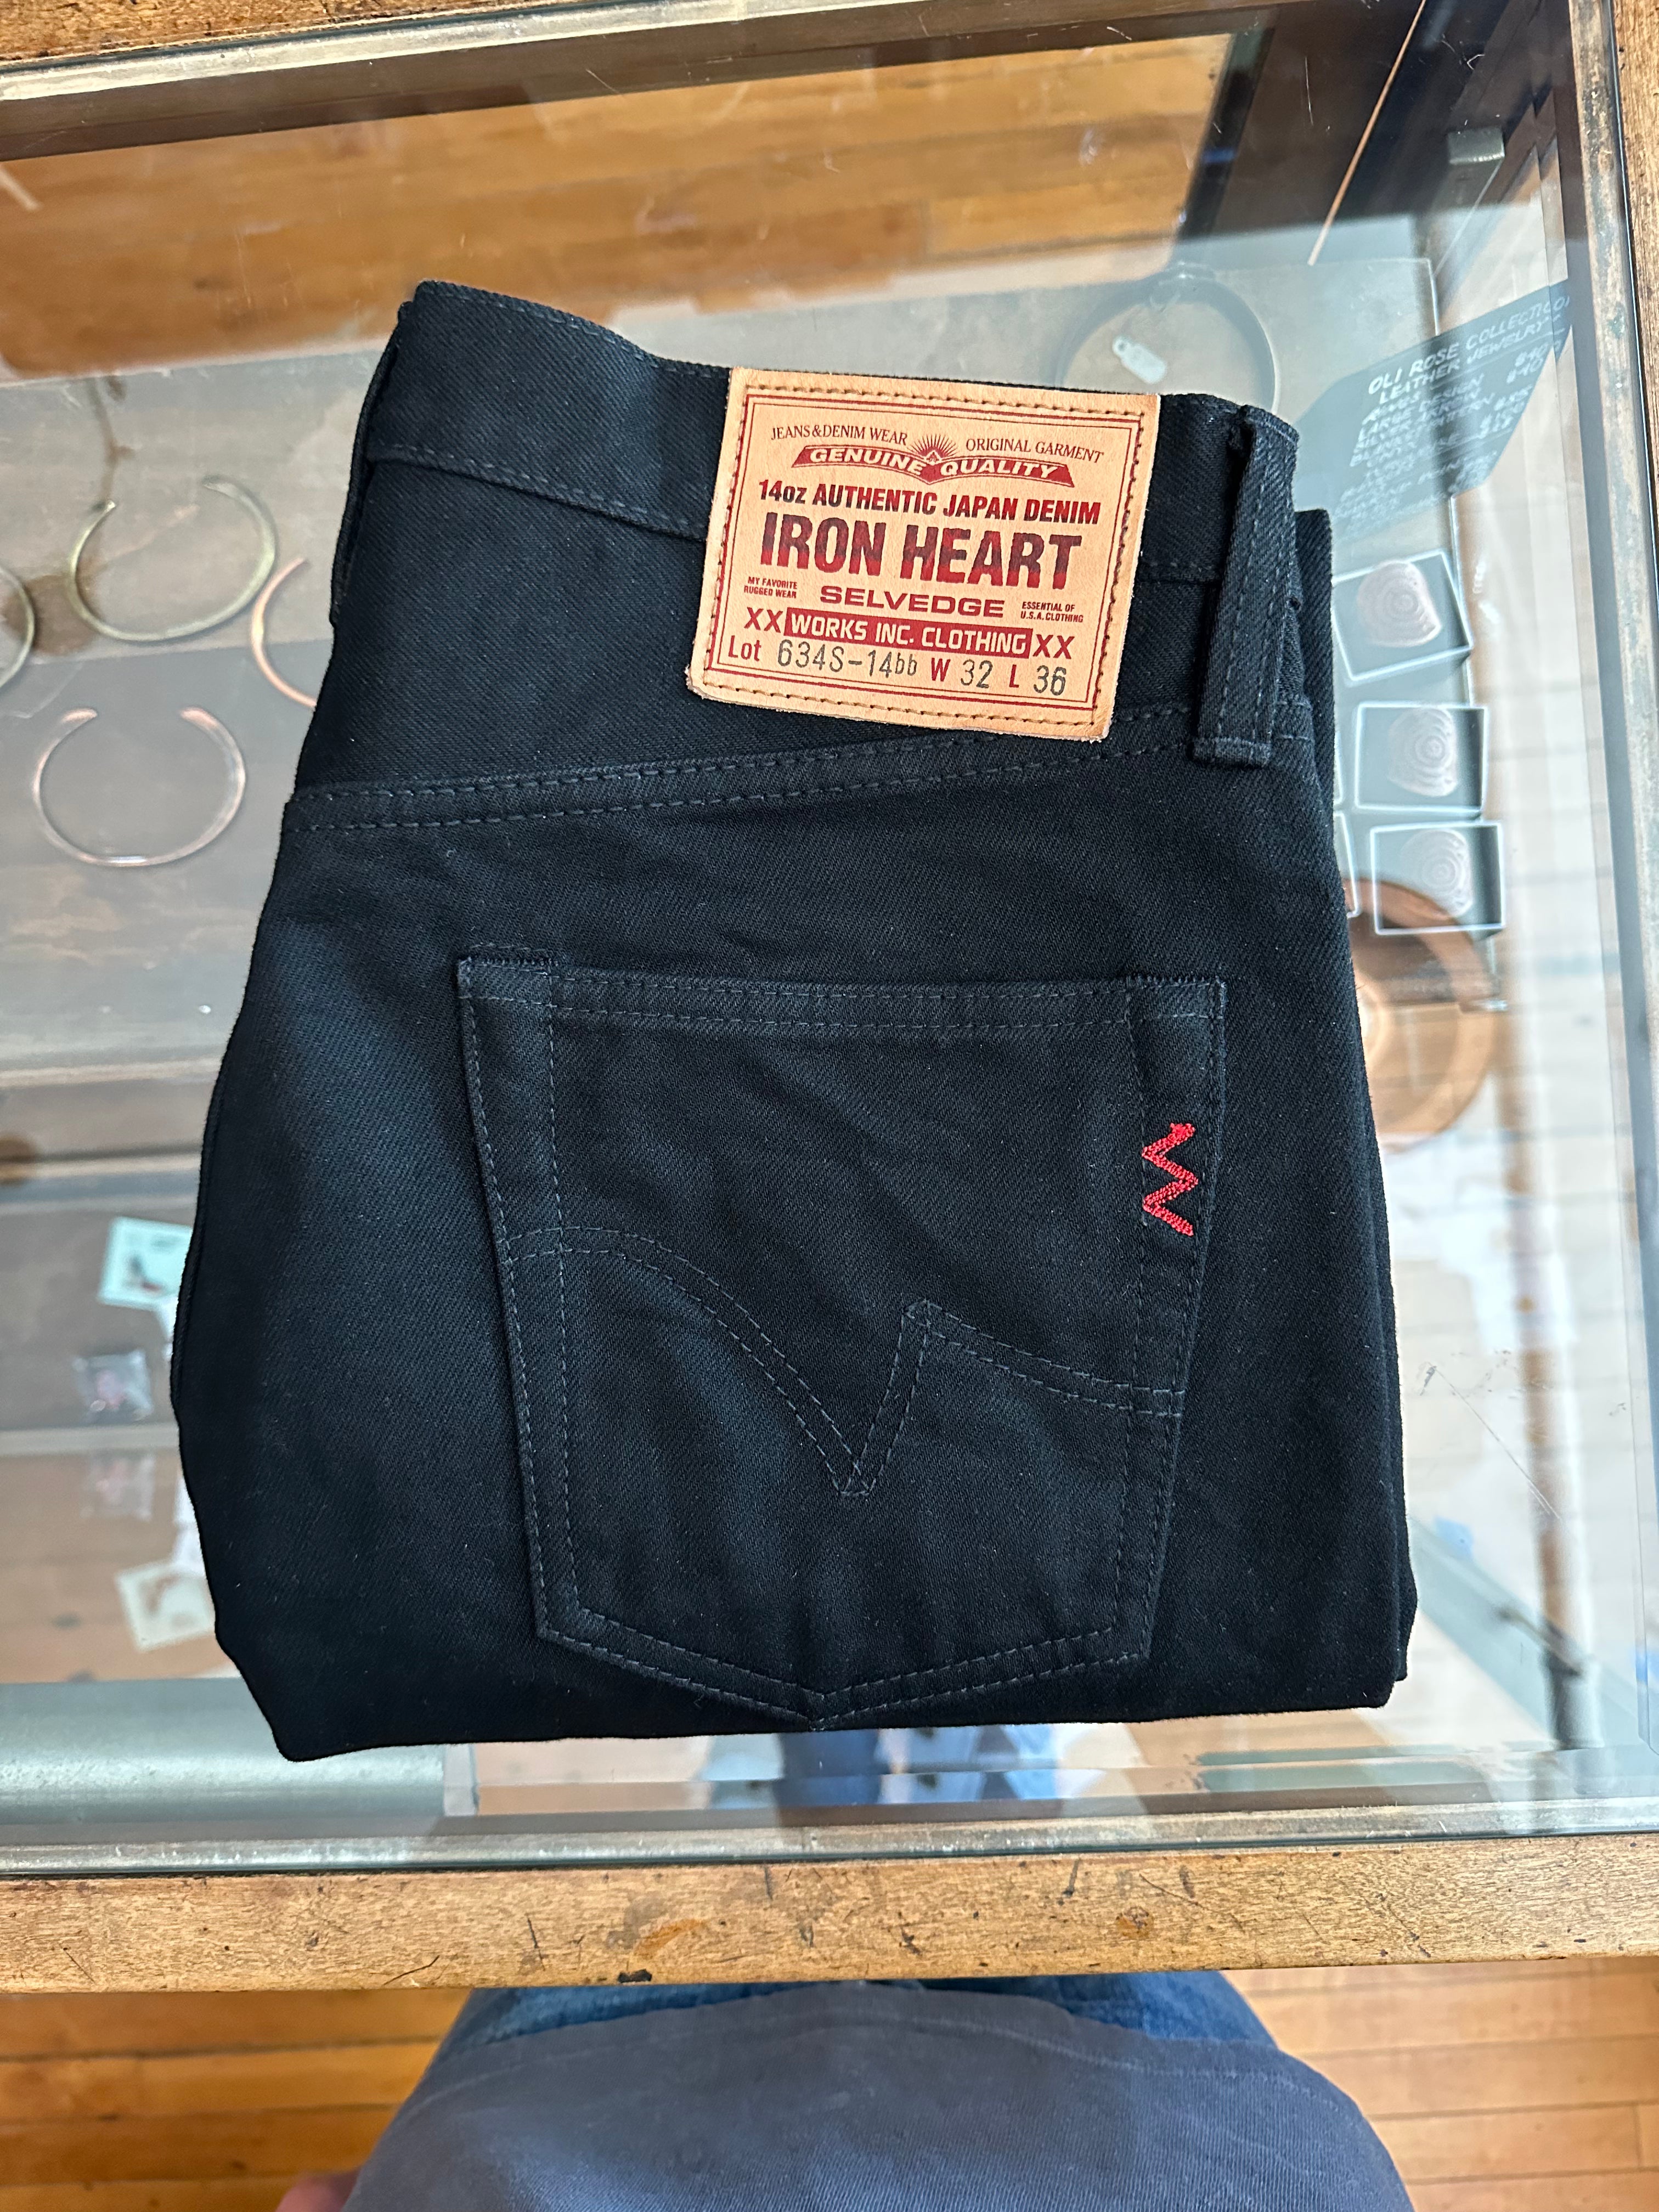 Gently Used Iron Heart 14oz 634S-14bb Jeans - Black - 32